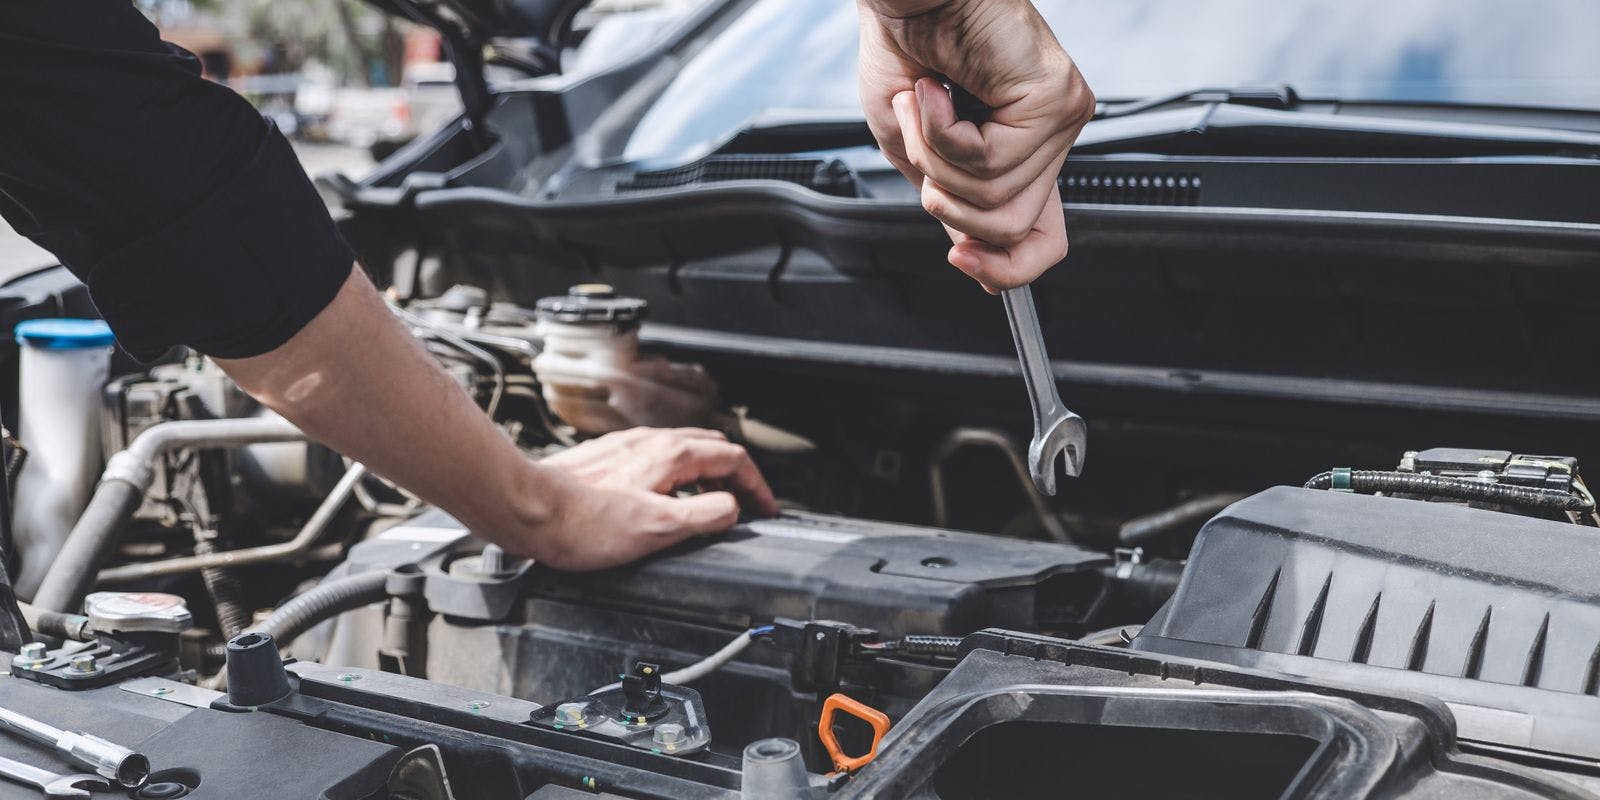 Servicing Your Lease Car
